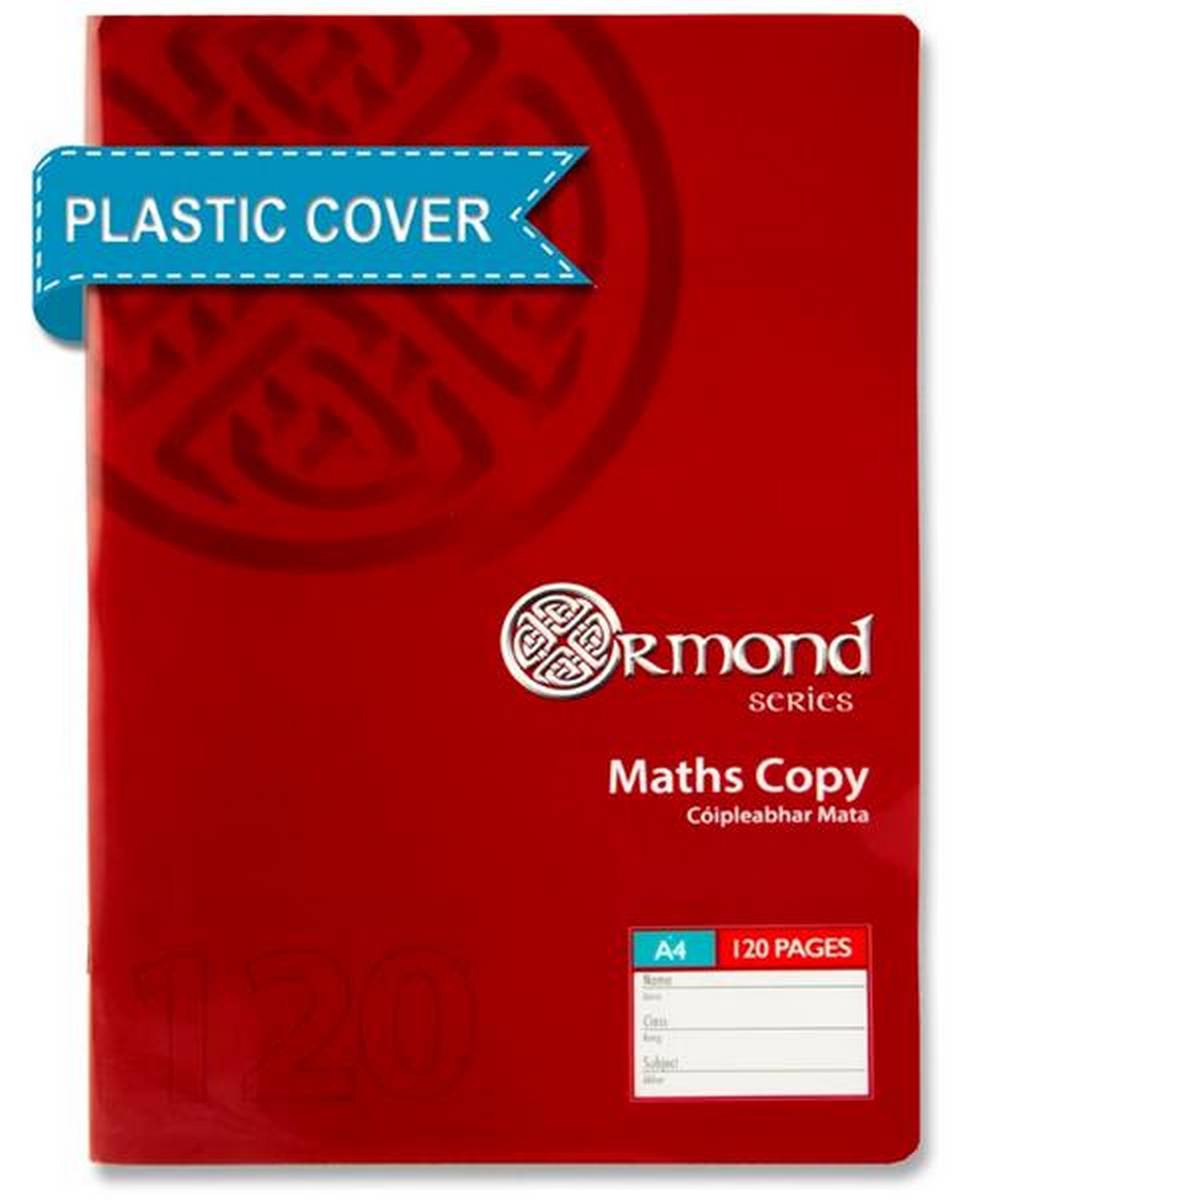 Ormond A4 120pg Maths Copy with Plastic Cover